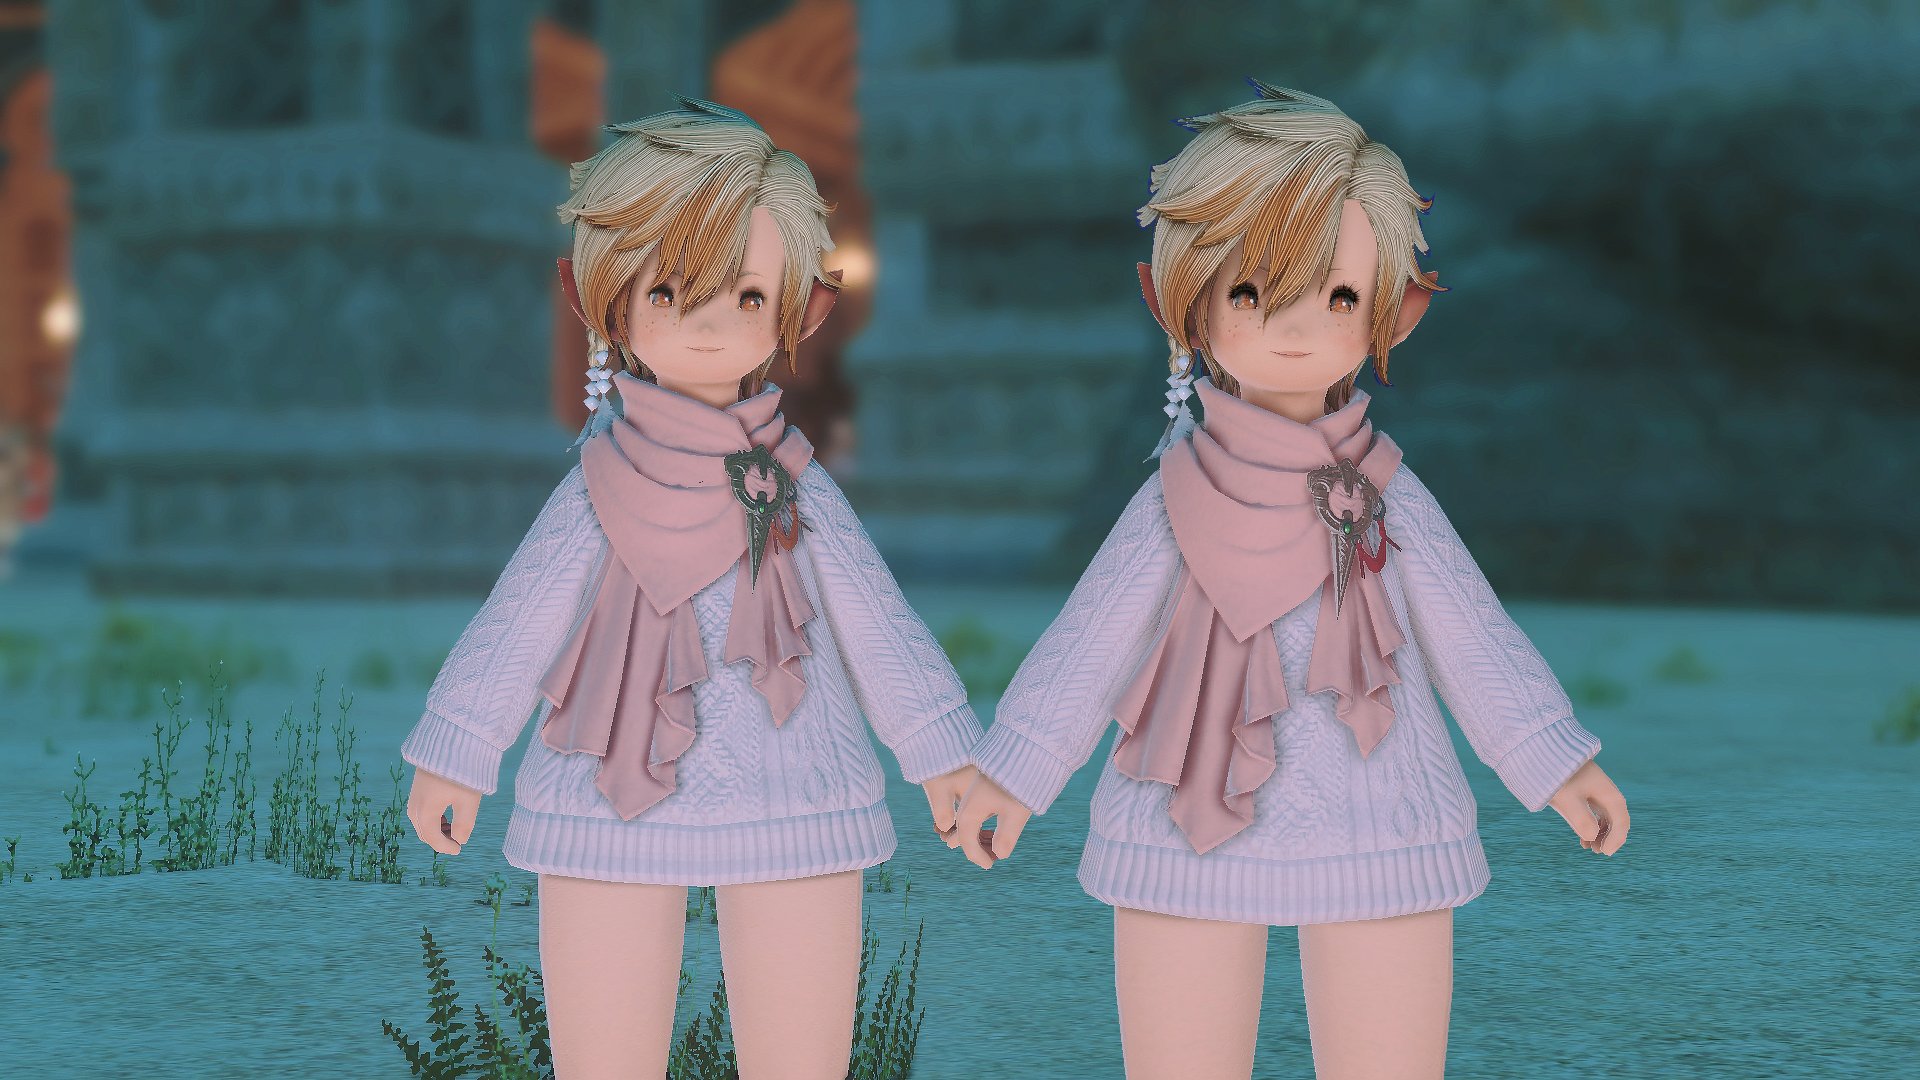 “It's not that hard to tell Lalafells apart in gender right? #ffxi...